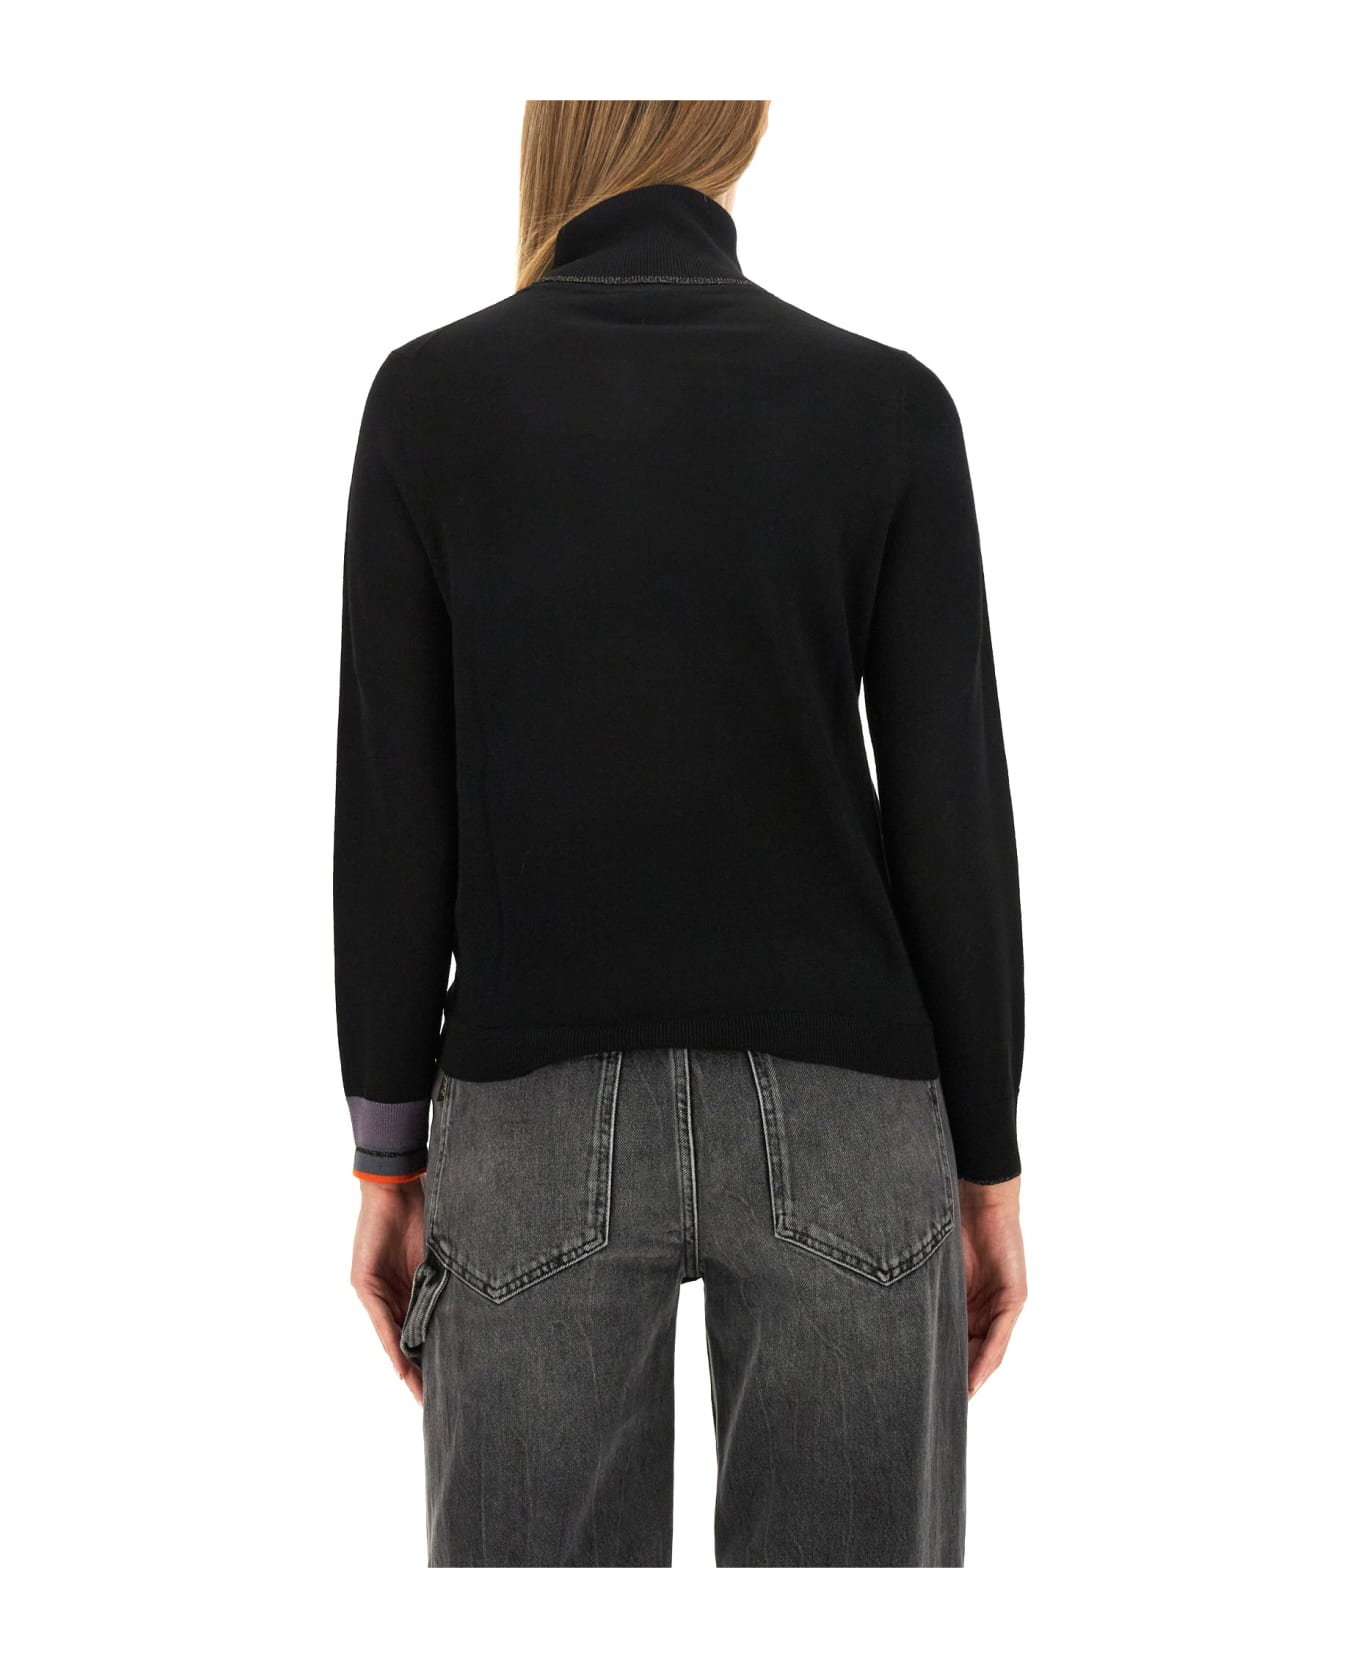 PS by Paul Smith Turtleneck Shirt - NERO